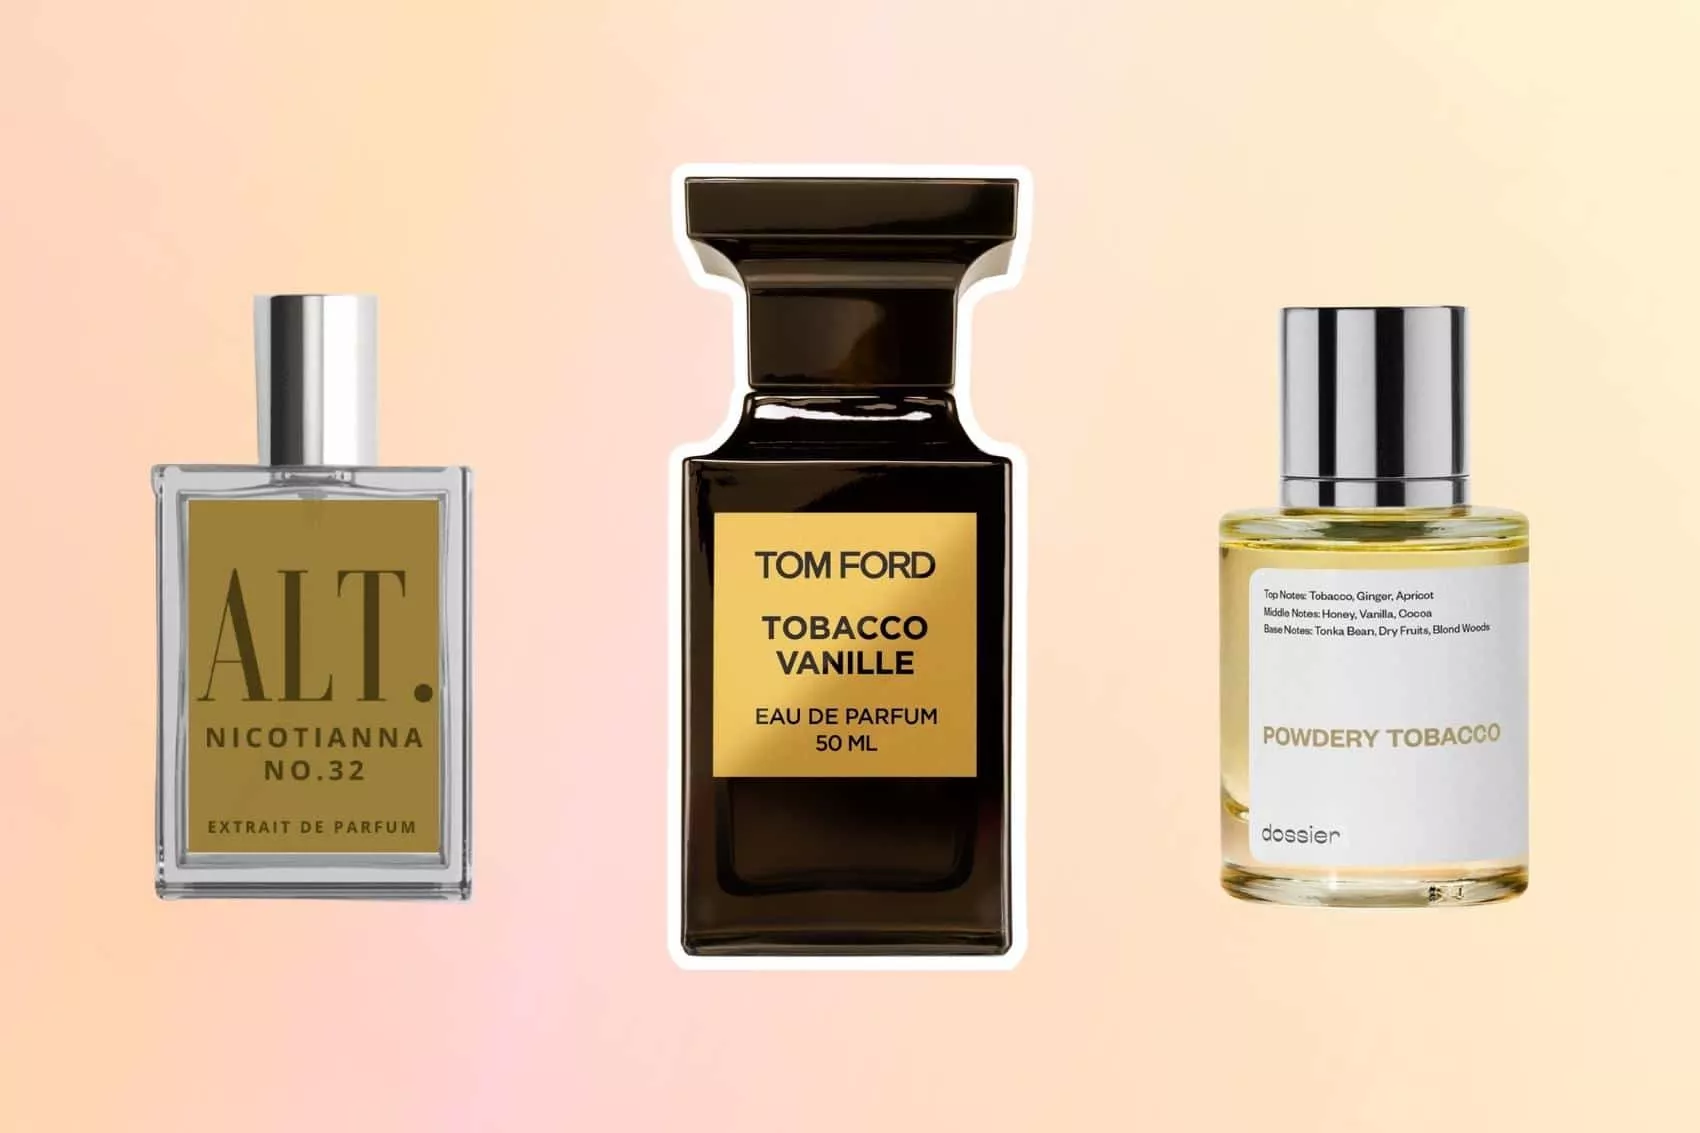 Tom Ford Tobacco Vanille dupes